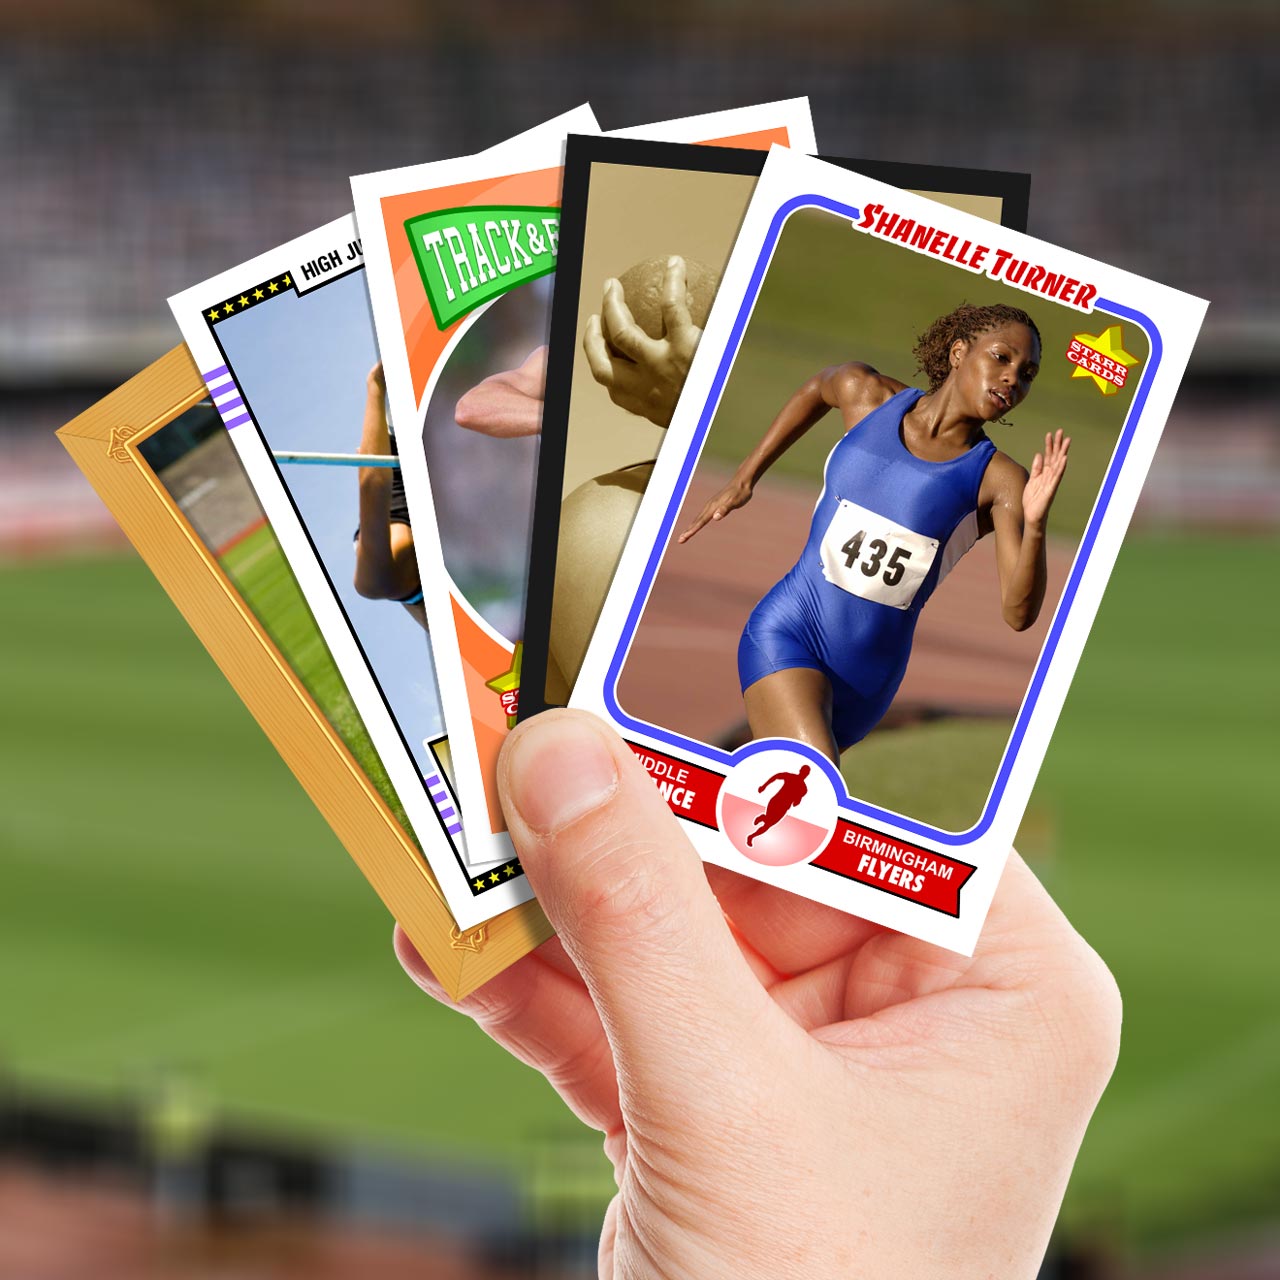 Make your own track and field card with Starr Cards.